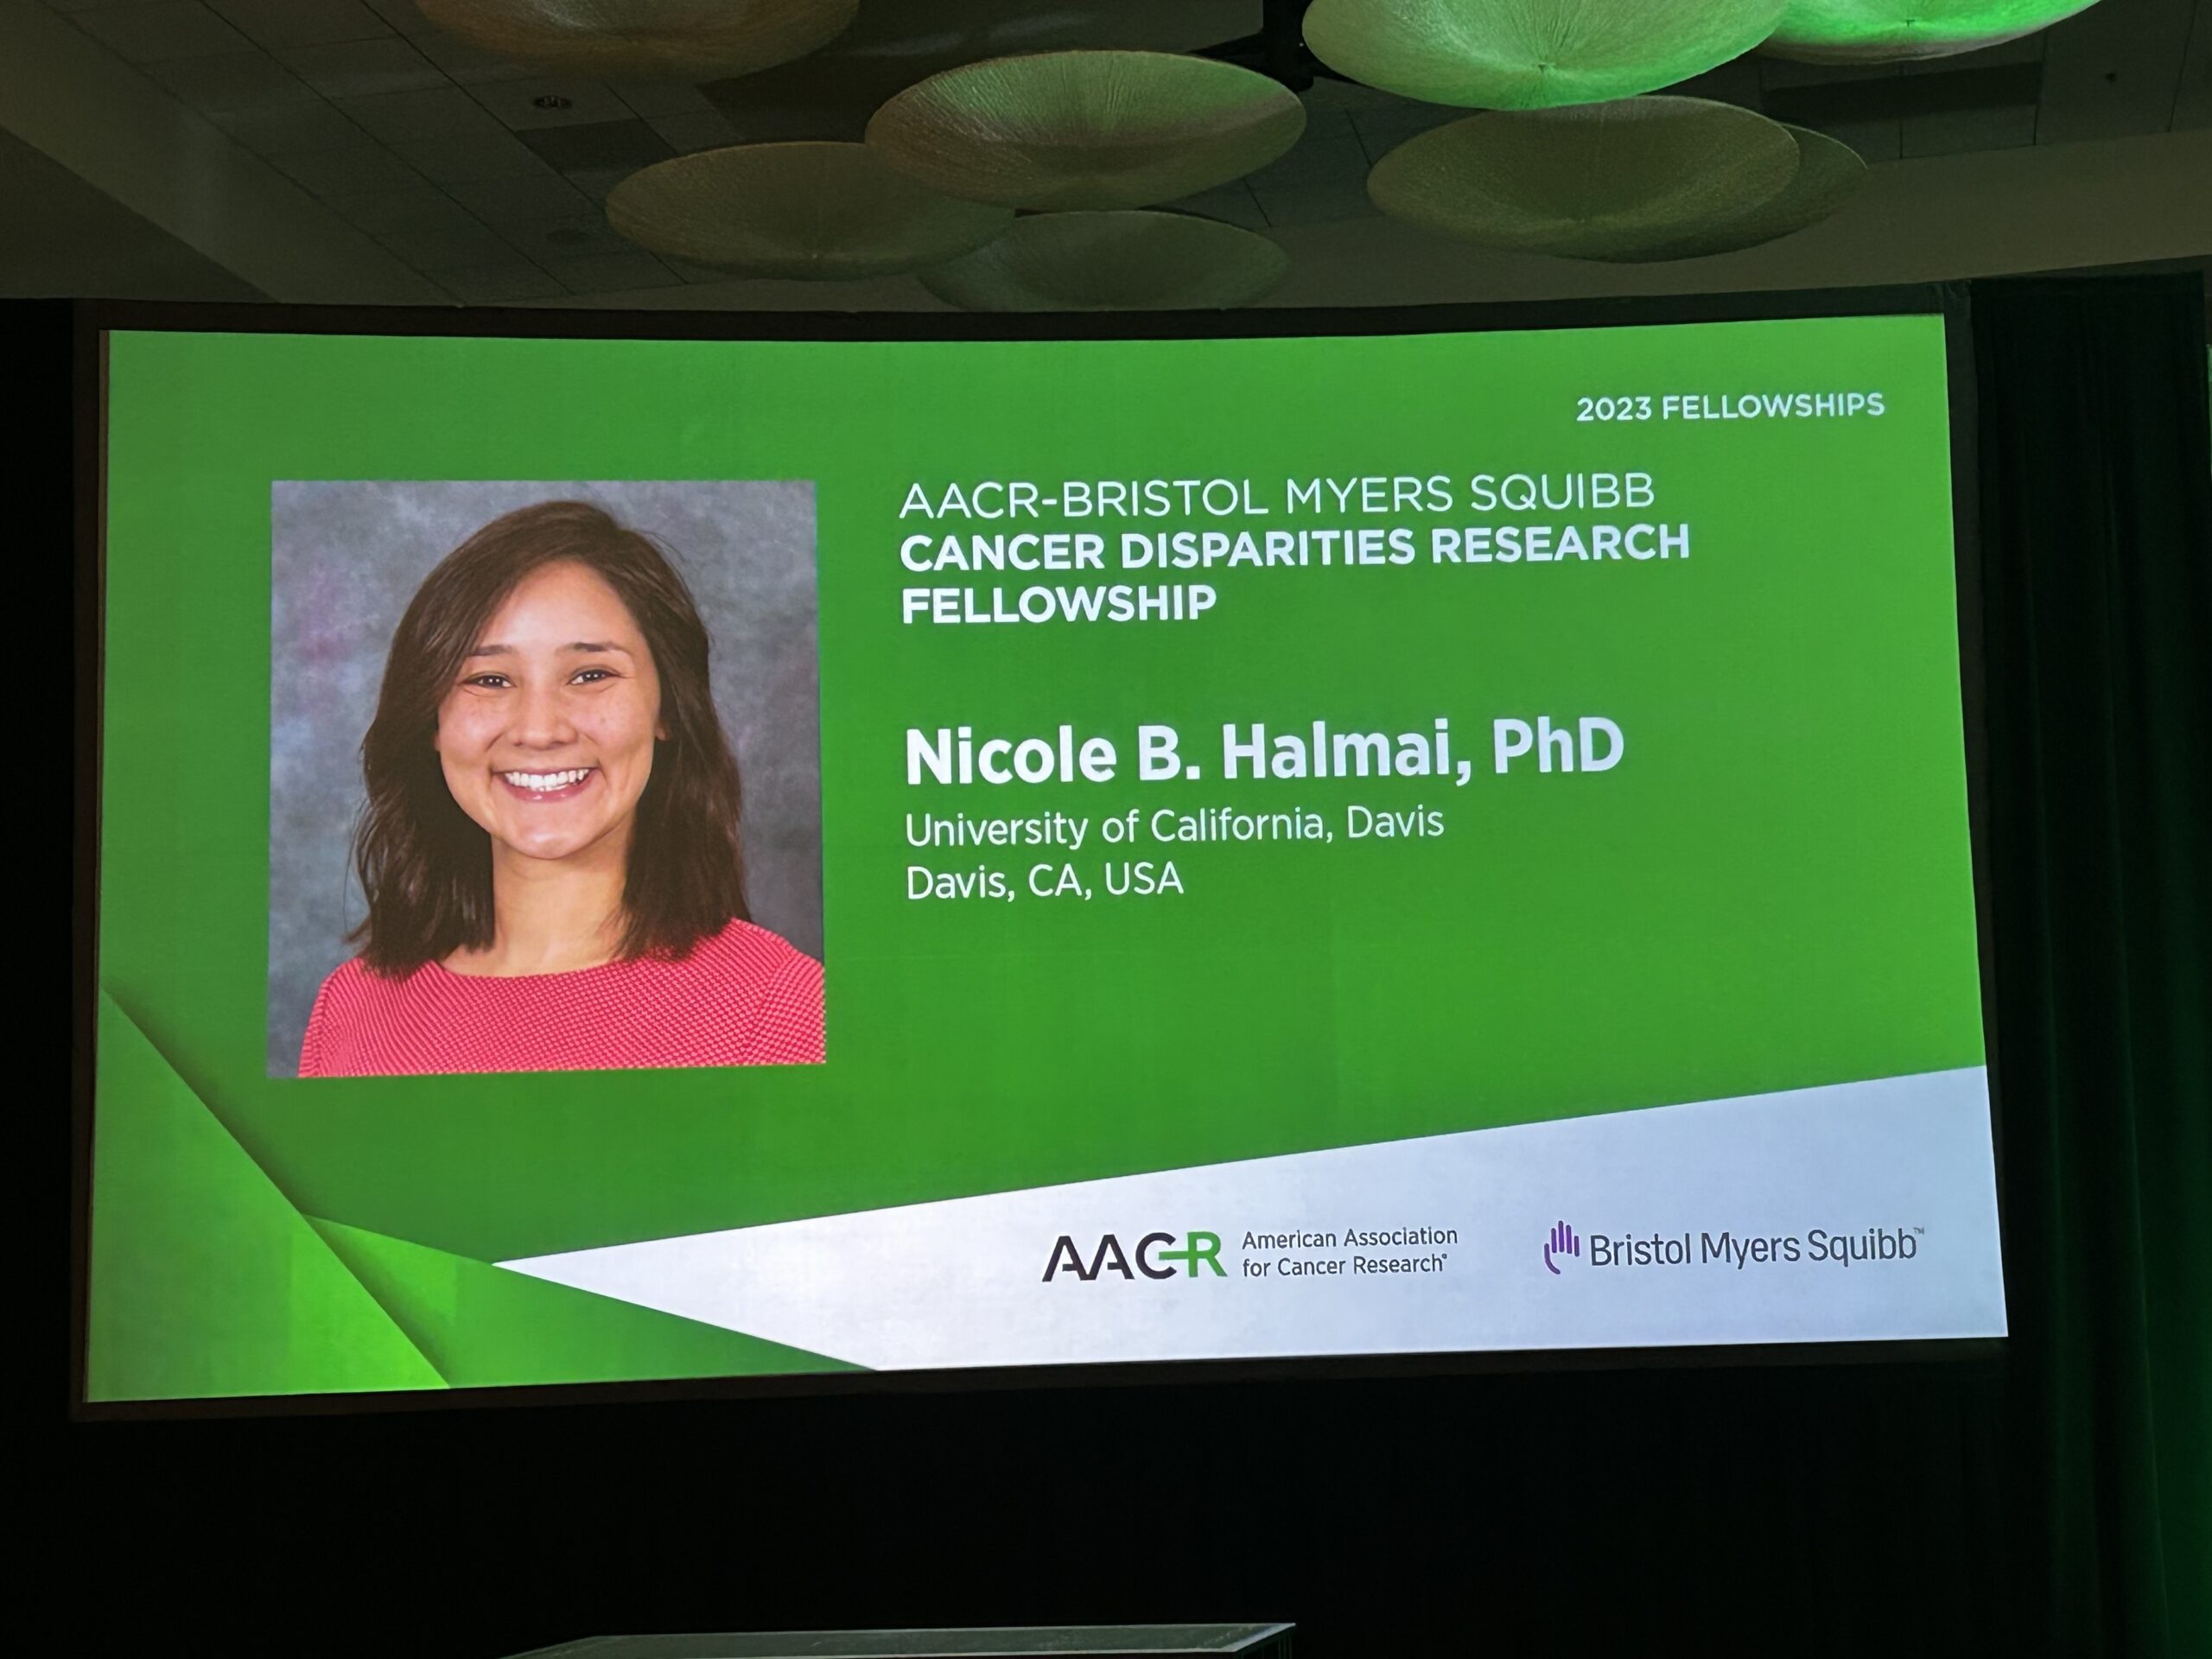 Congratulations to Nicole Halmai! She was recognized at AACR for her 2023 AACR-Bristol Myers Squibb Cancer Disparities Research Fellowship.